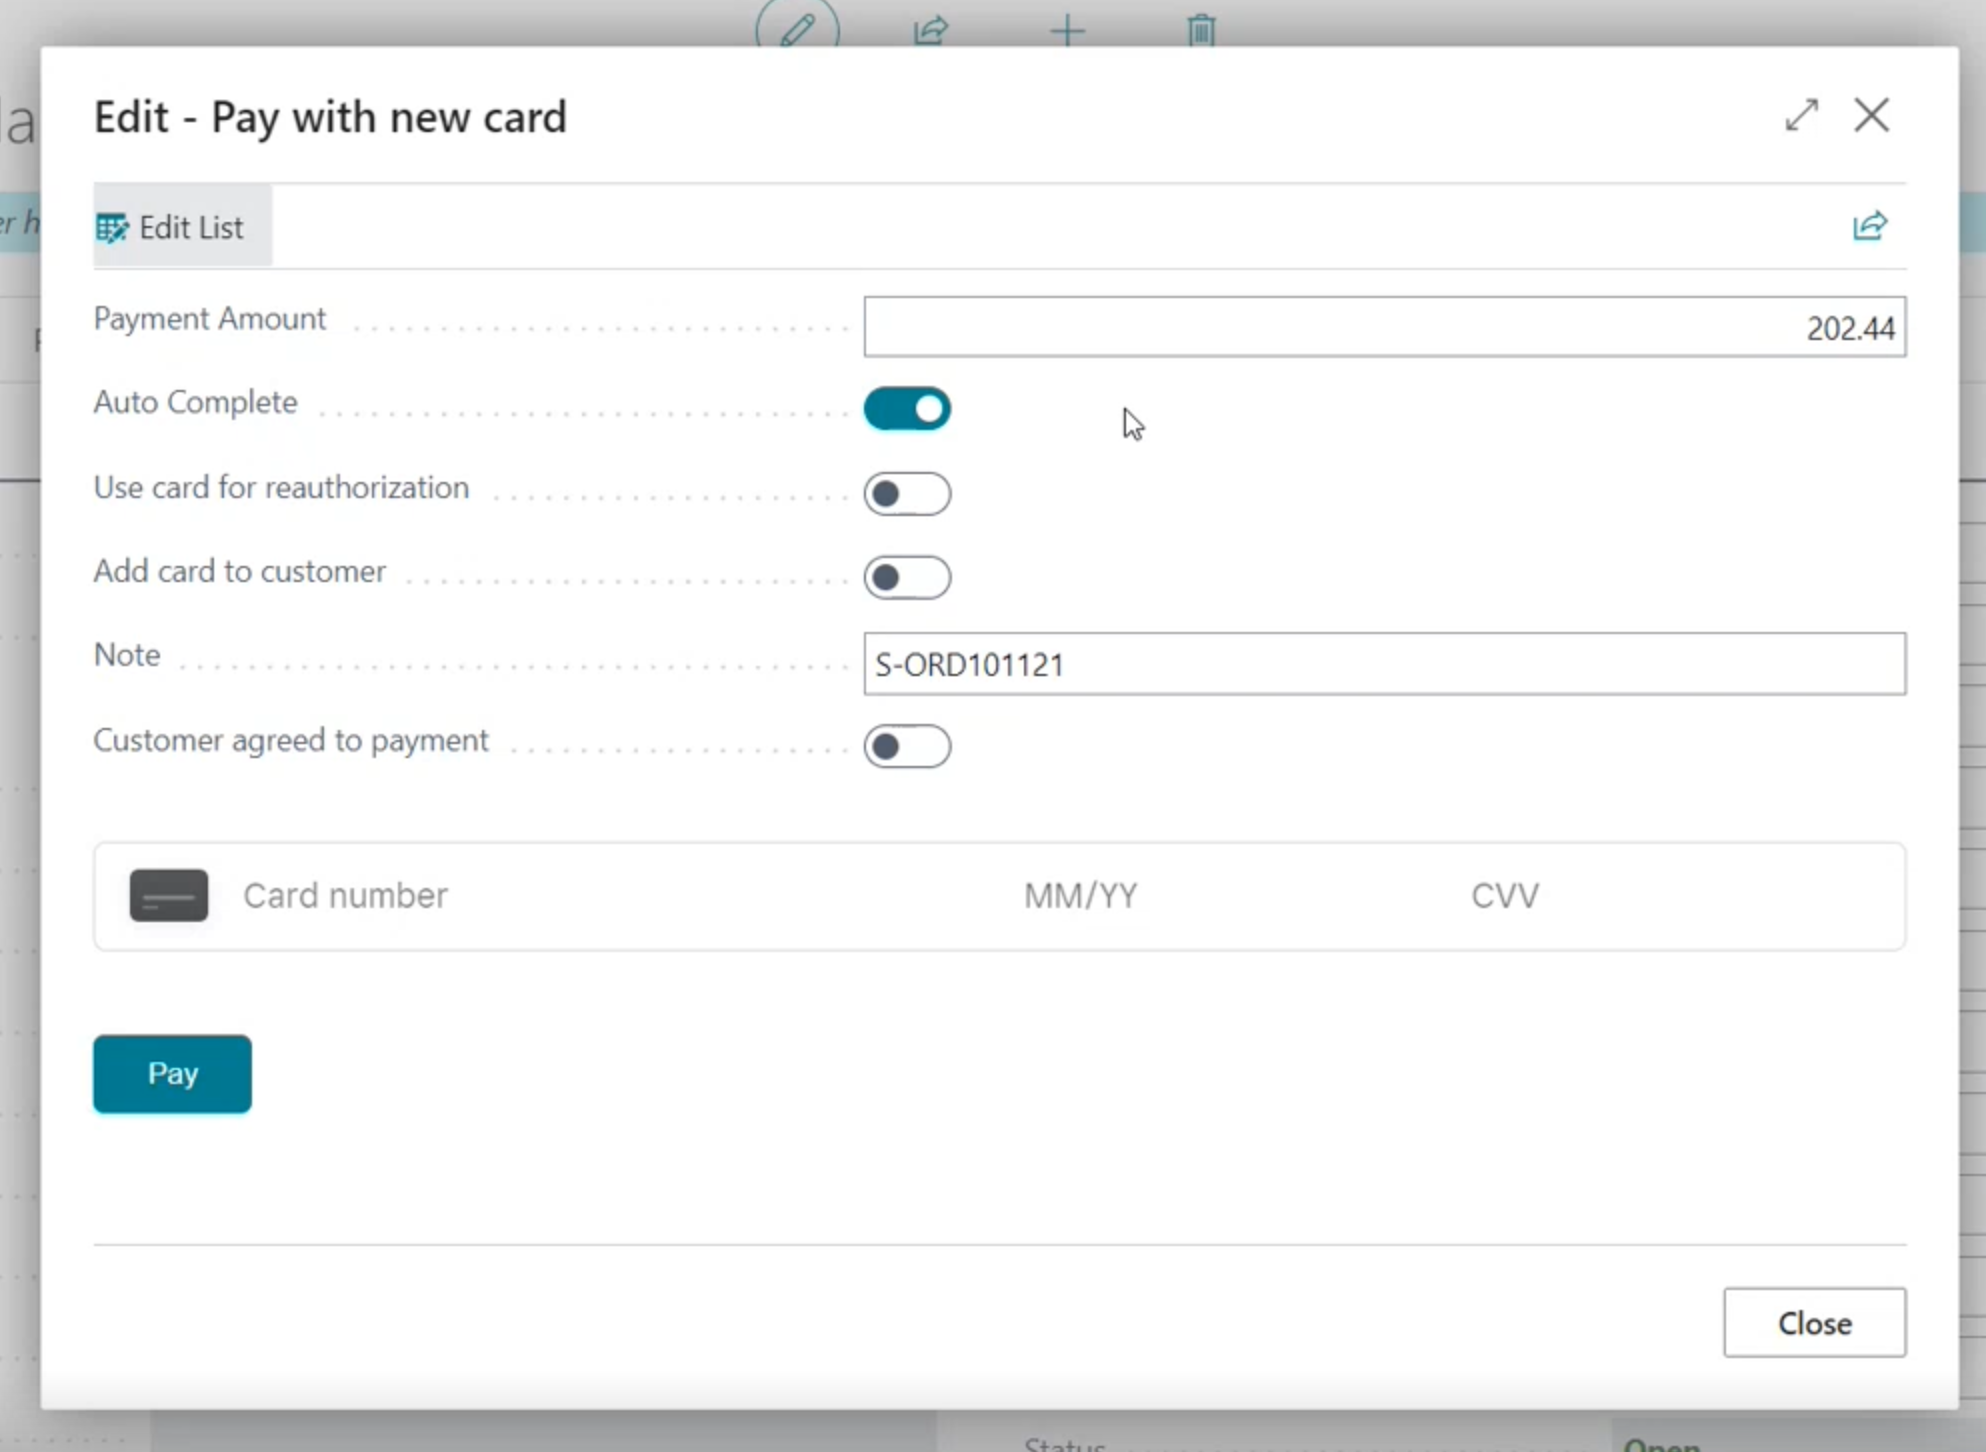 A graphic showing the payment amount and credit card inputs when paying with a new card in Business Central.